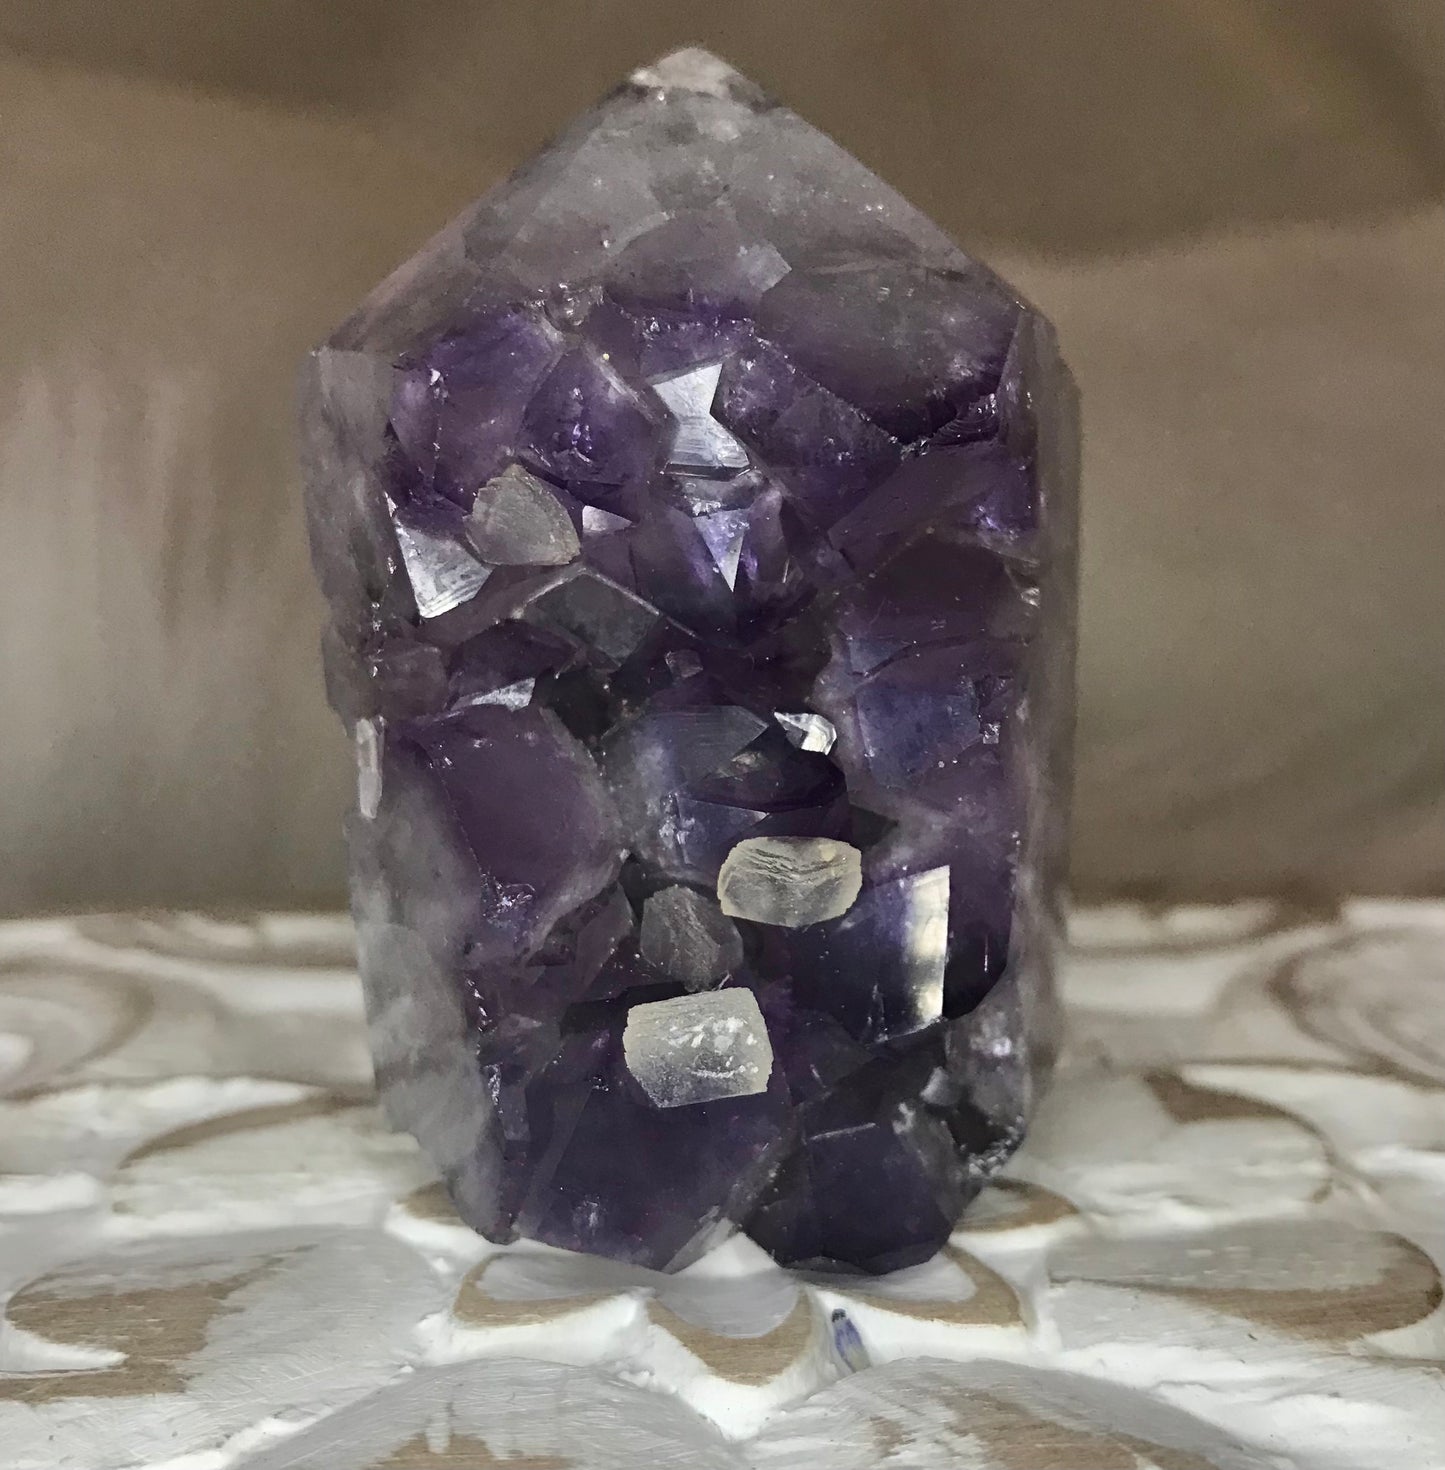 Amethyst Tower With calcite inclusions